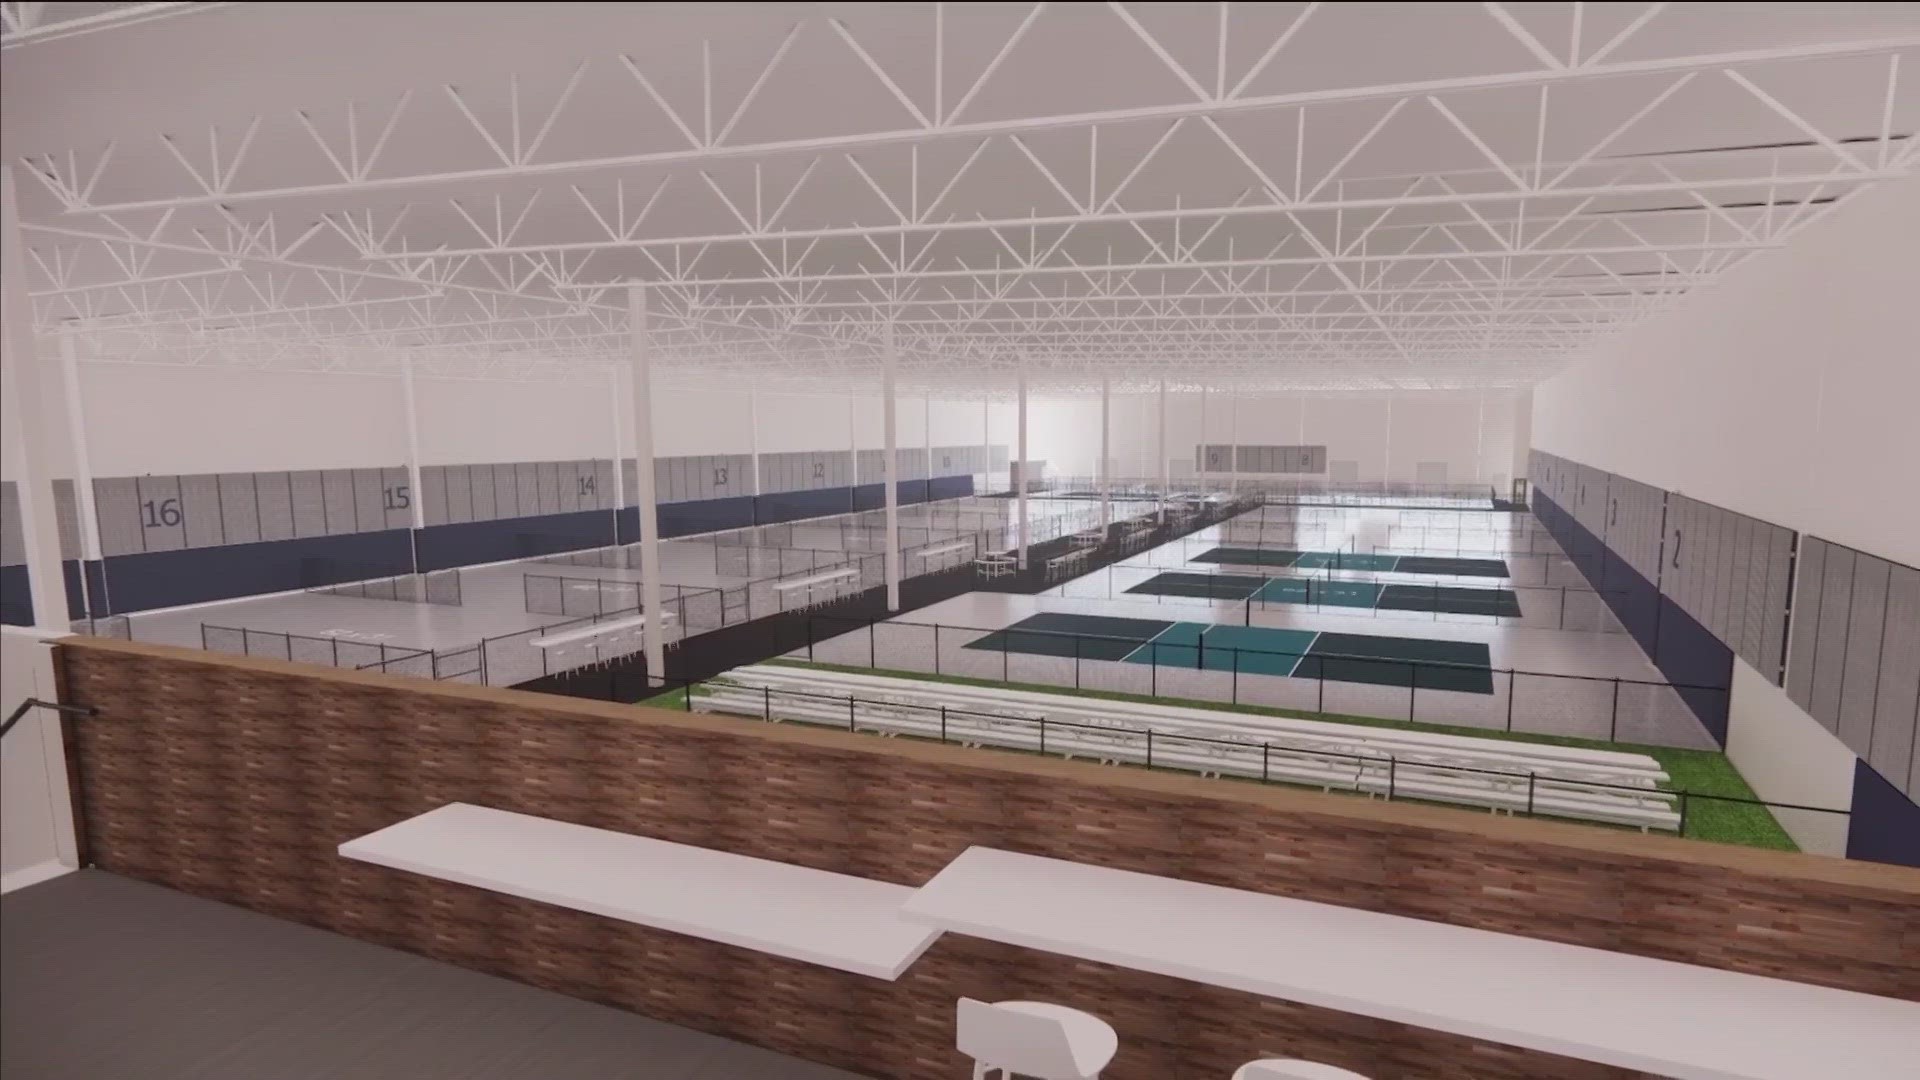 The Flying Pickle, co-founded by Idaho pickleball legends Susannah Barr and Nick Petterson, will be Idaho's largest pickleball facility.